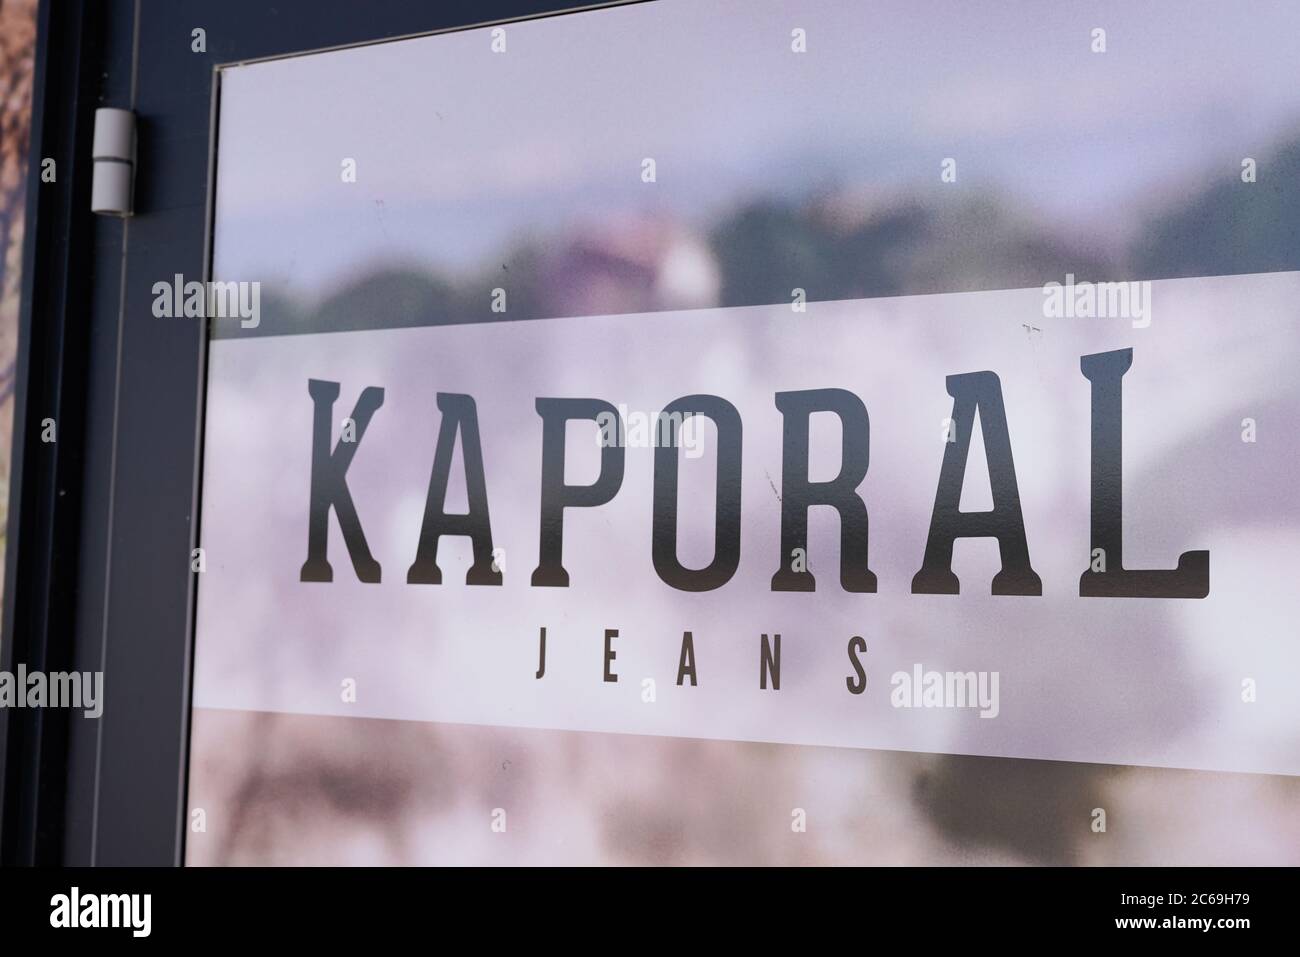 Bordeaux , Aquitaine / France - 07 06 2020 : Kaporal jeans sign logo and  text on windows shop of fashion men women clothing brand store Stock Photo  - Alamy